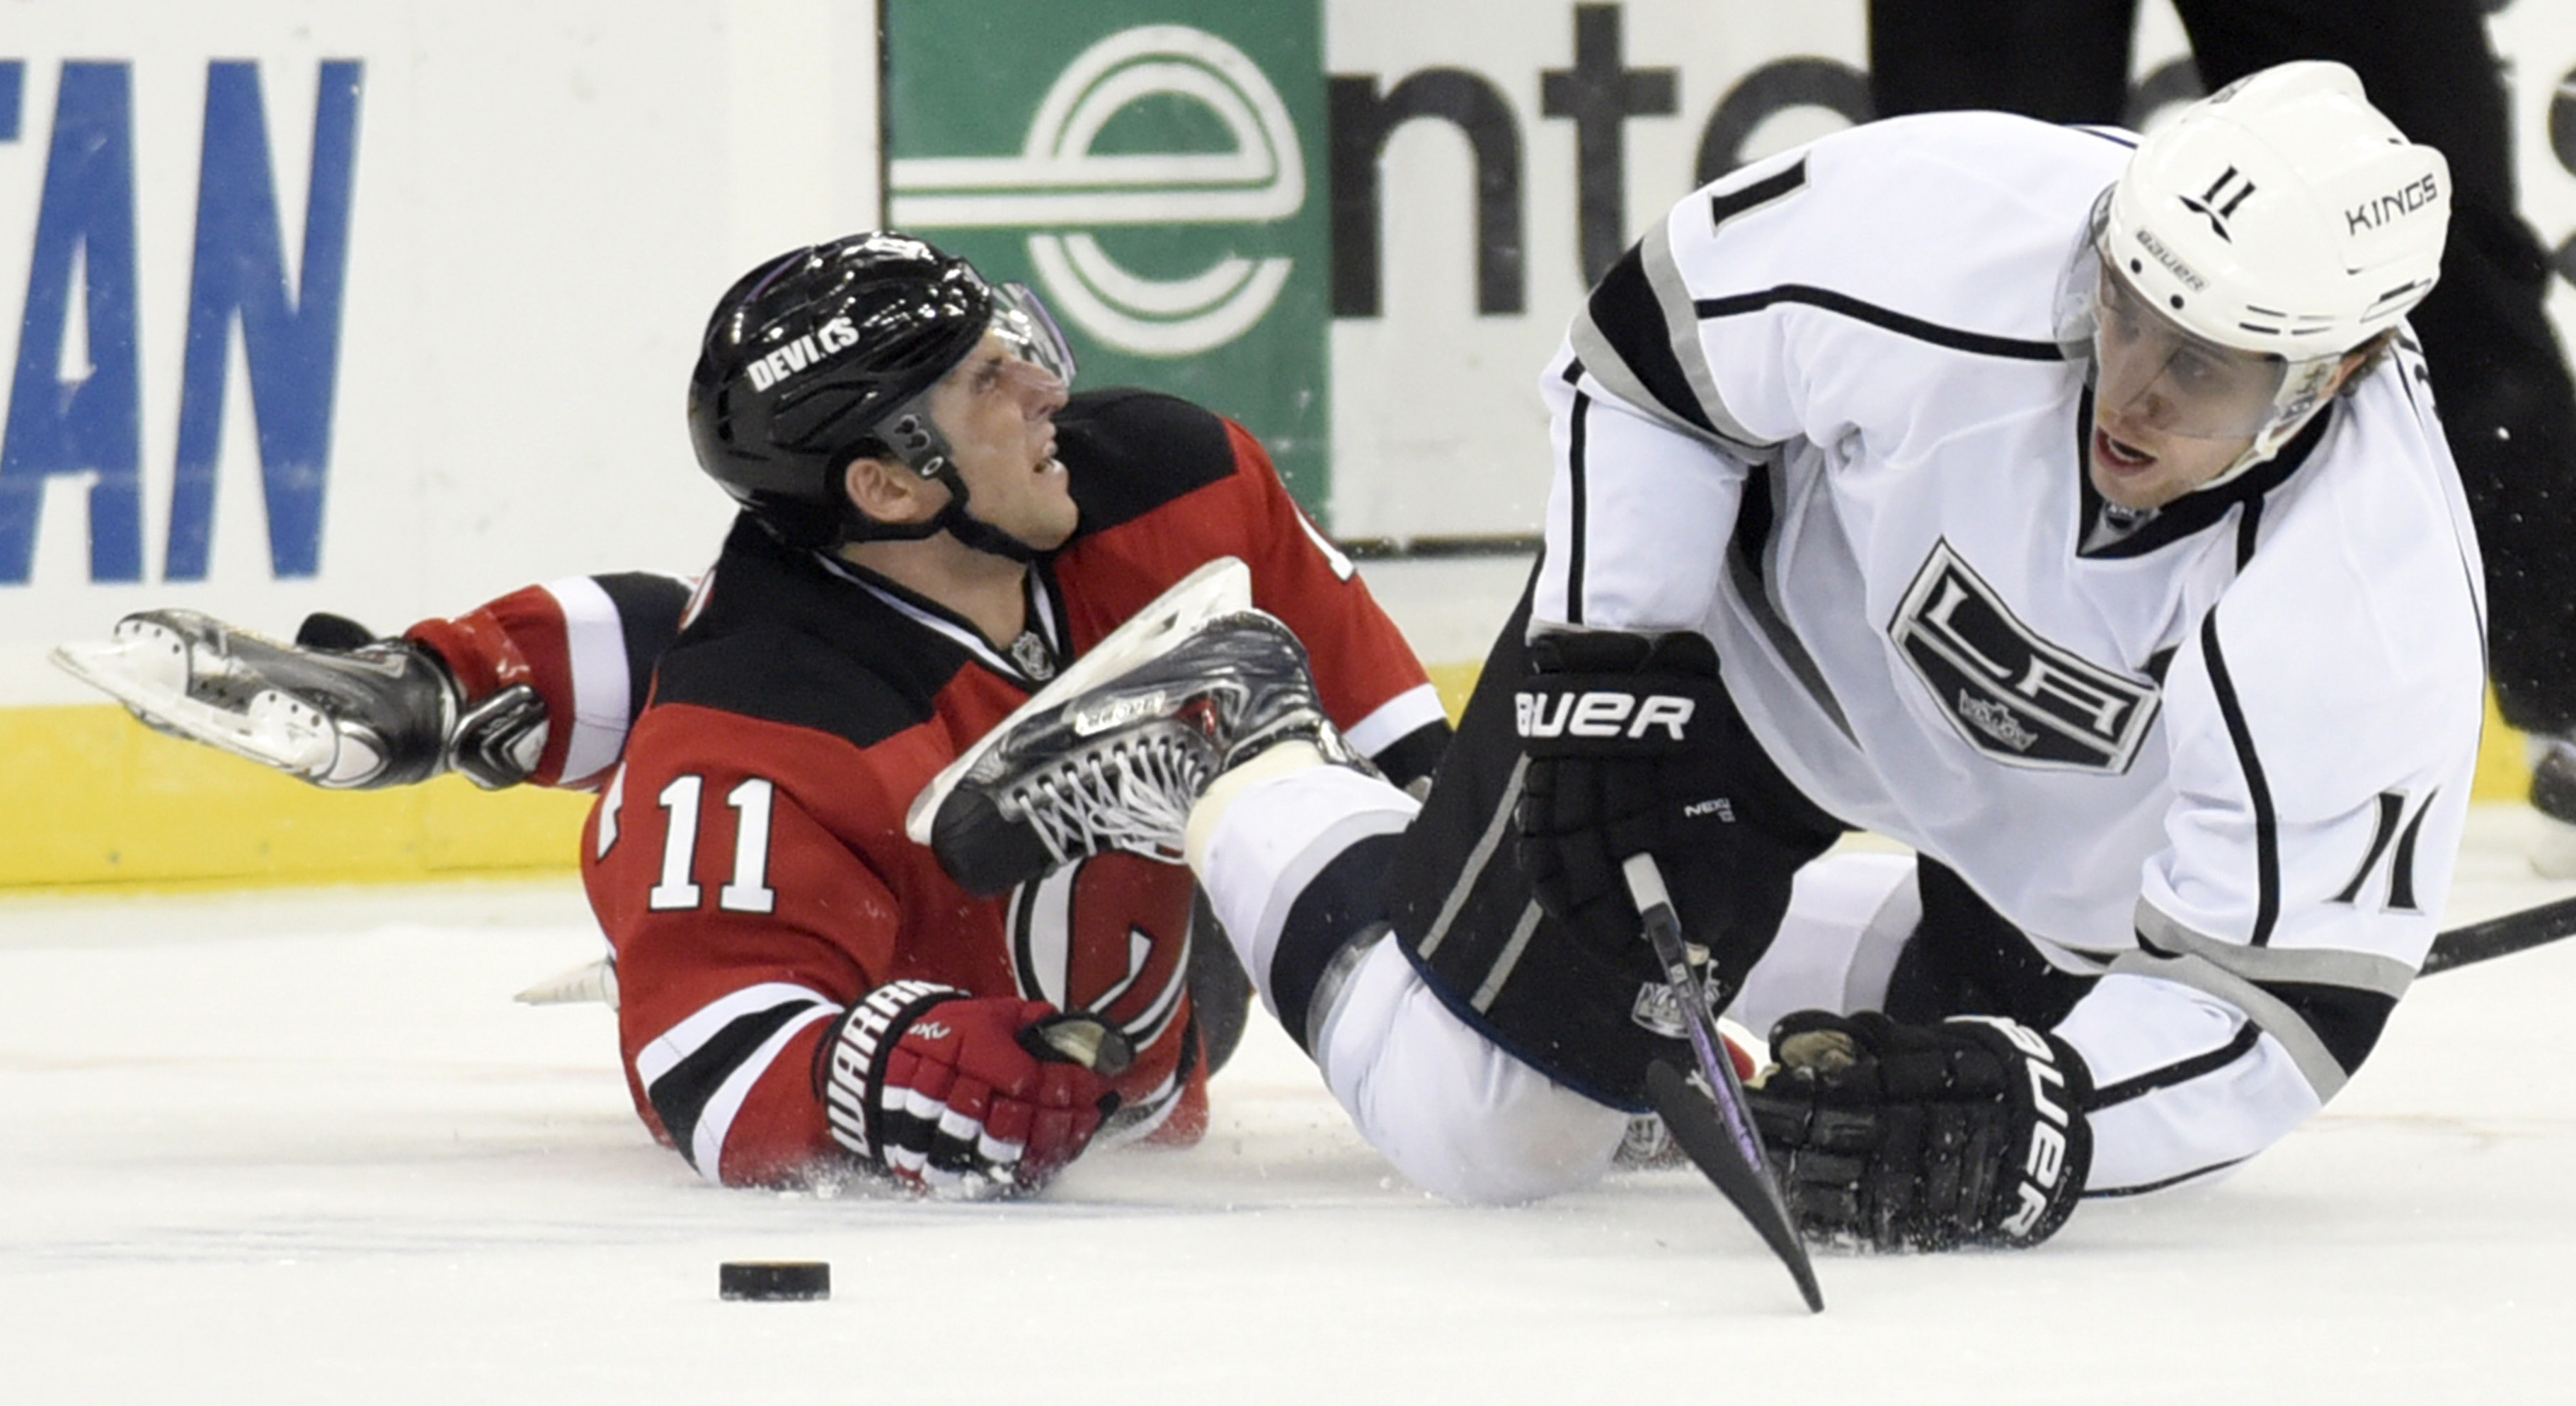 Los Angeles Kings' Anze Kopitar, right, is tripped by New Jersey Devils' Stephen Gionta during the first period of an NHL hockey game Monday, March 23, 2015, in Newark, N.J. (AP Photo/Bill Kostroun)